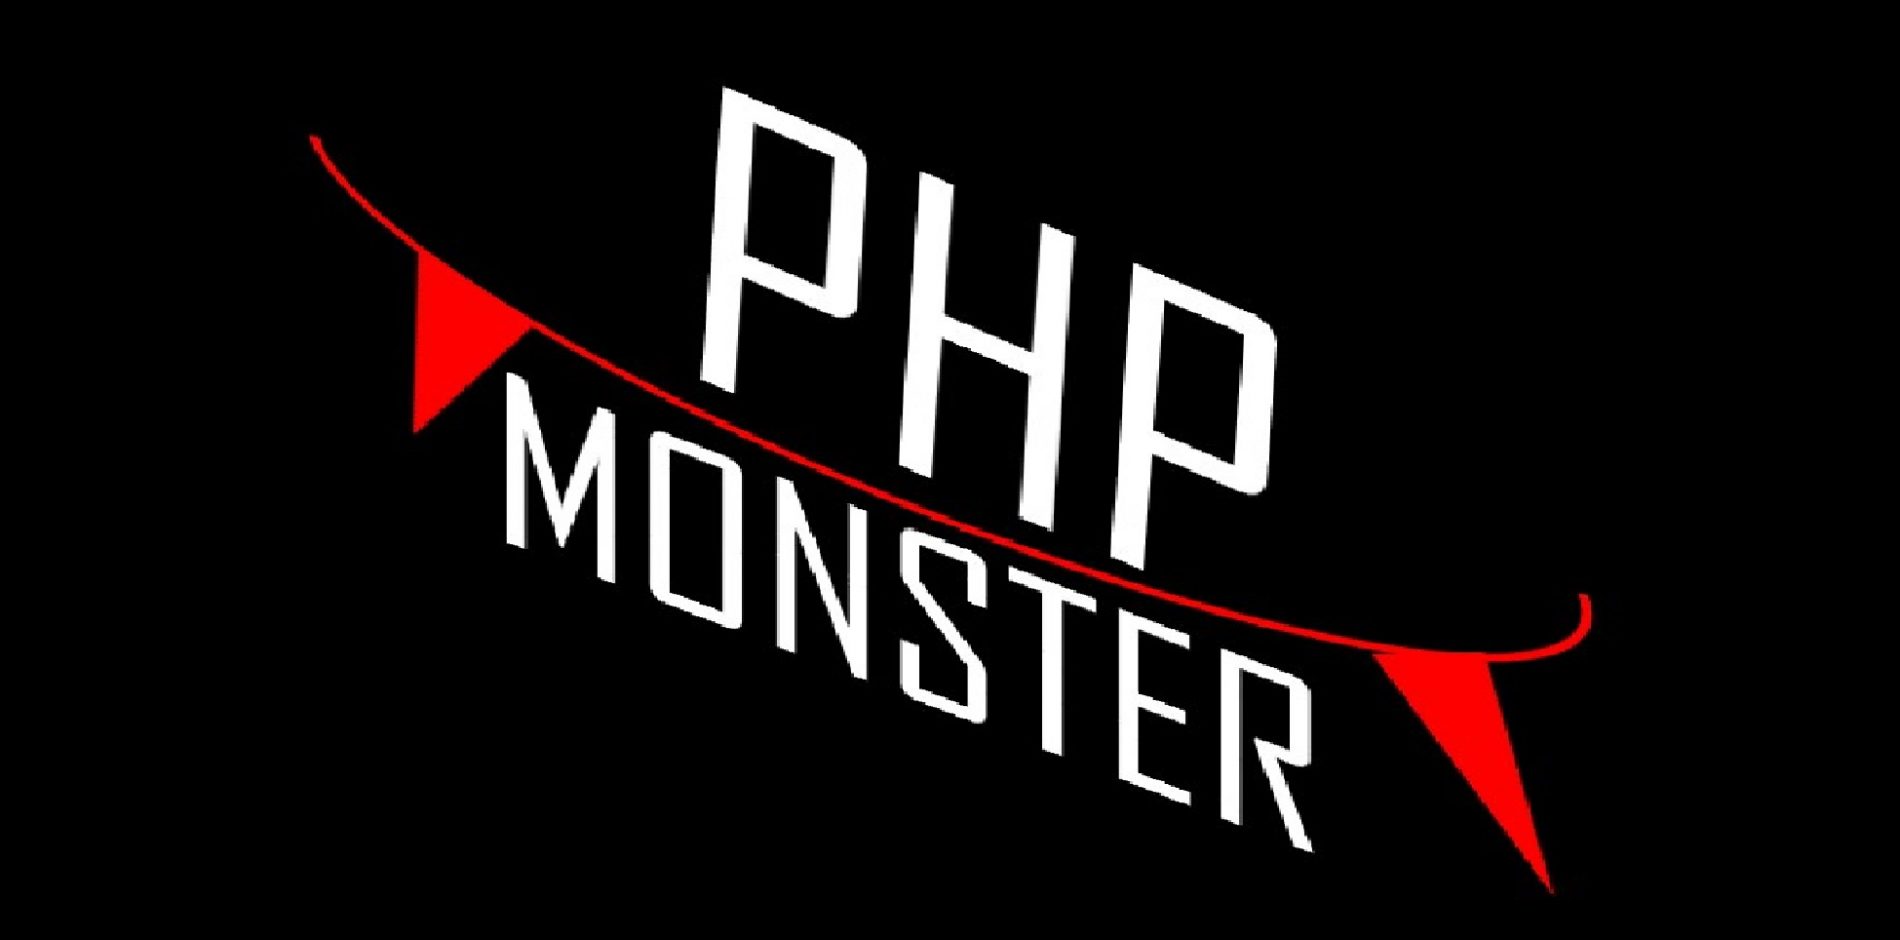 PHP MonsteR